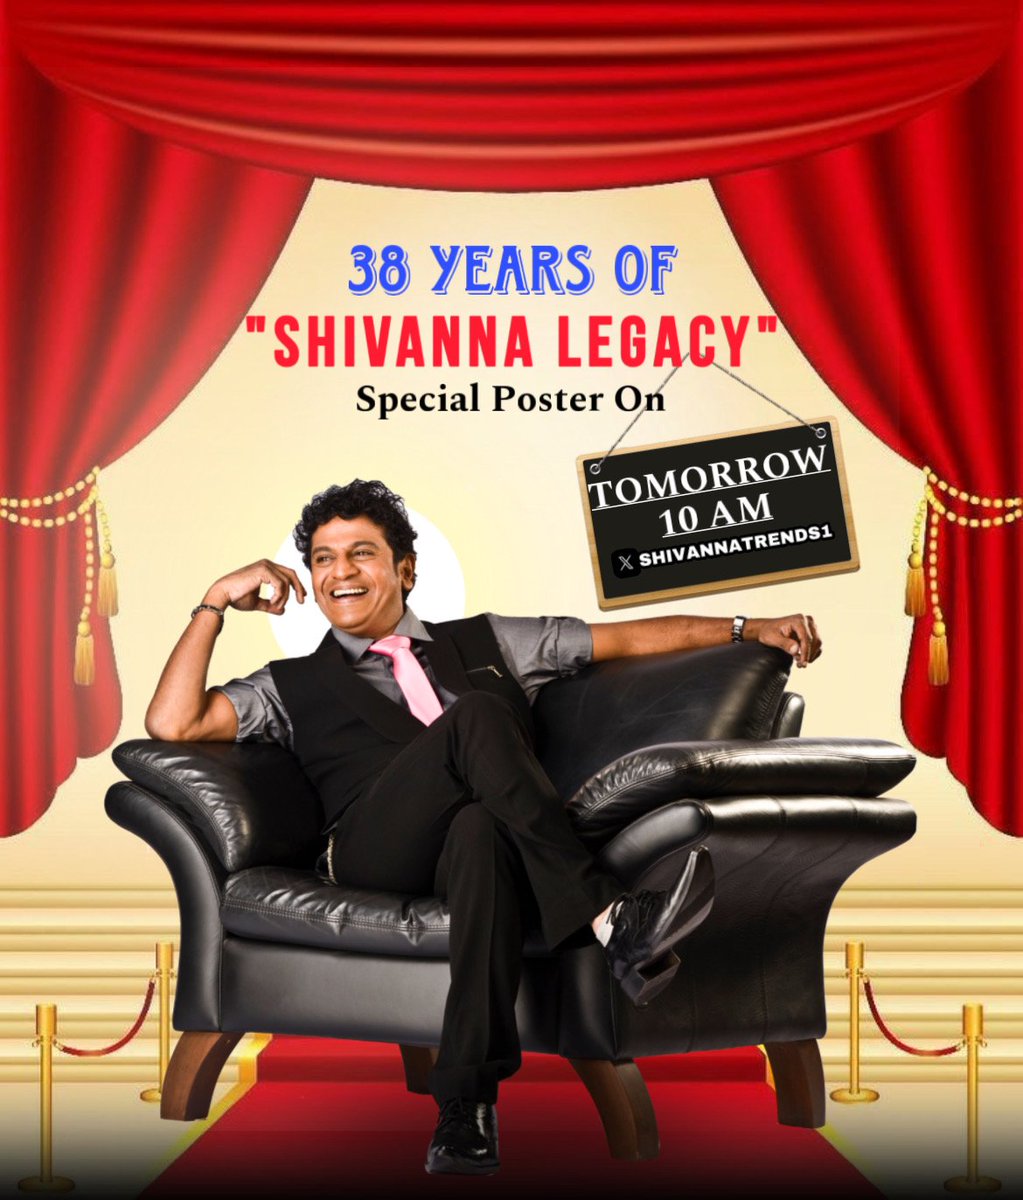 On the account of #38YearsOfShivannaLegacy 

• Special CDP releasing today 6:00PM 
• Special Poster releasing tomorrow 10:00AM 

Stay tuned to @shivannaupdates and @ShivannaTrends1